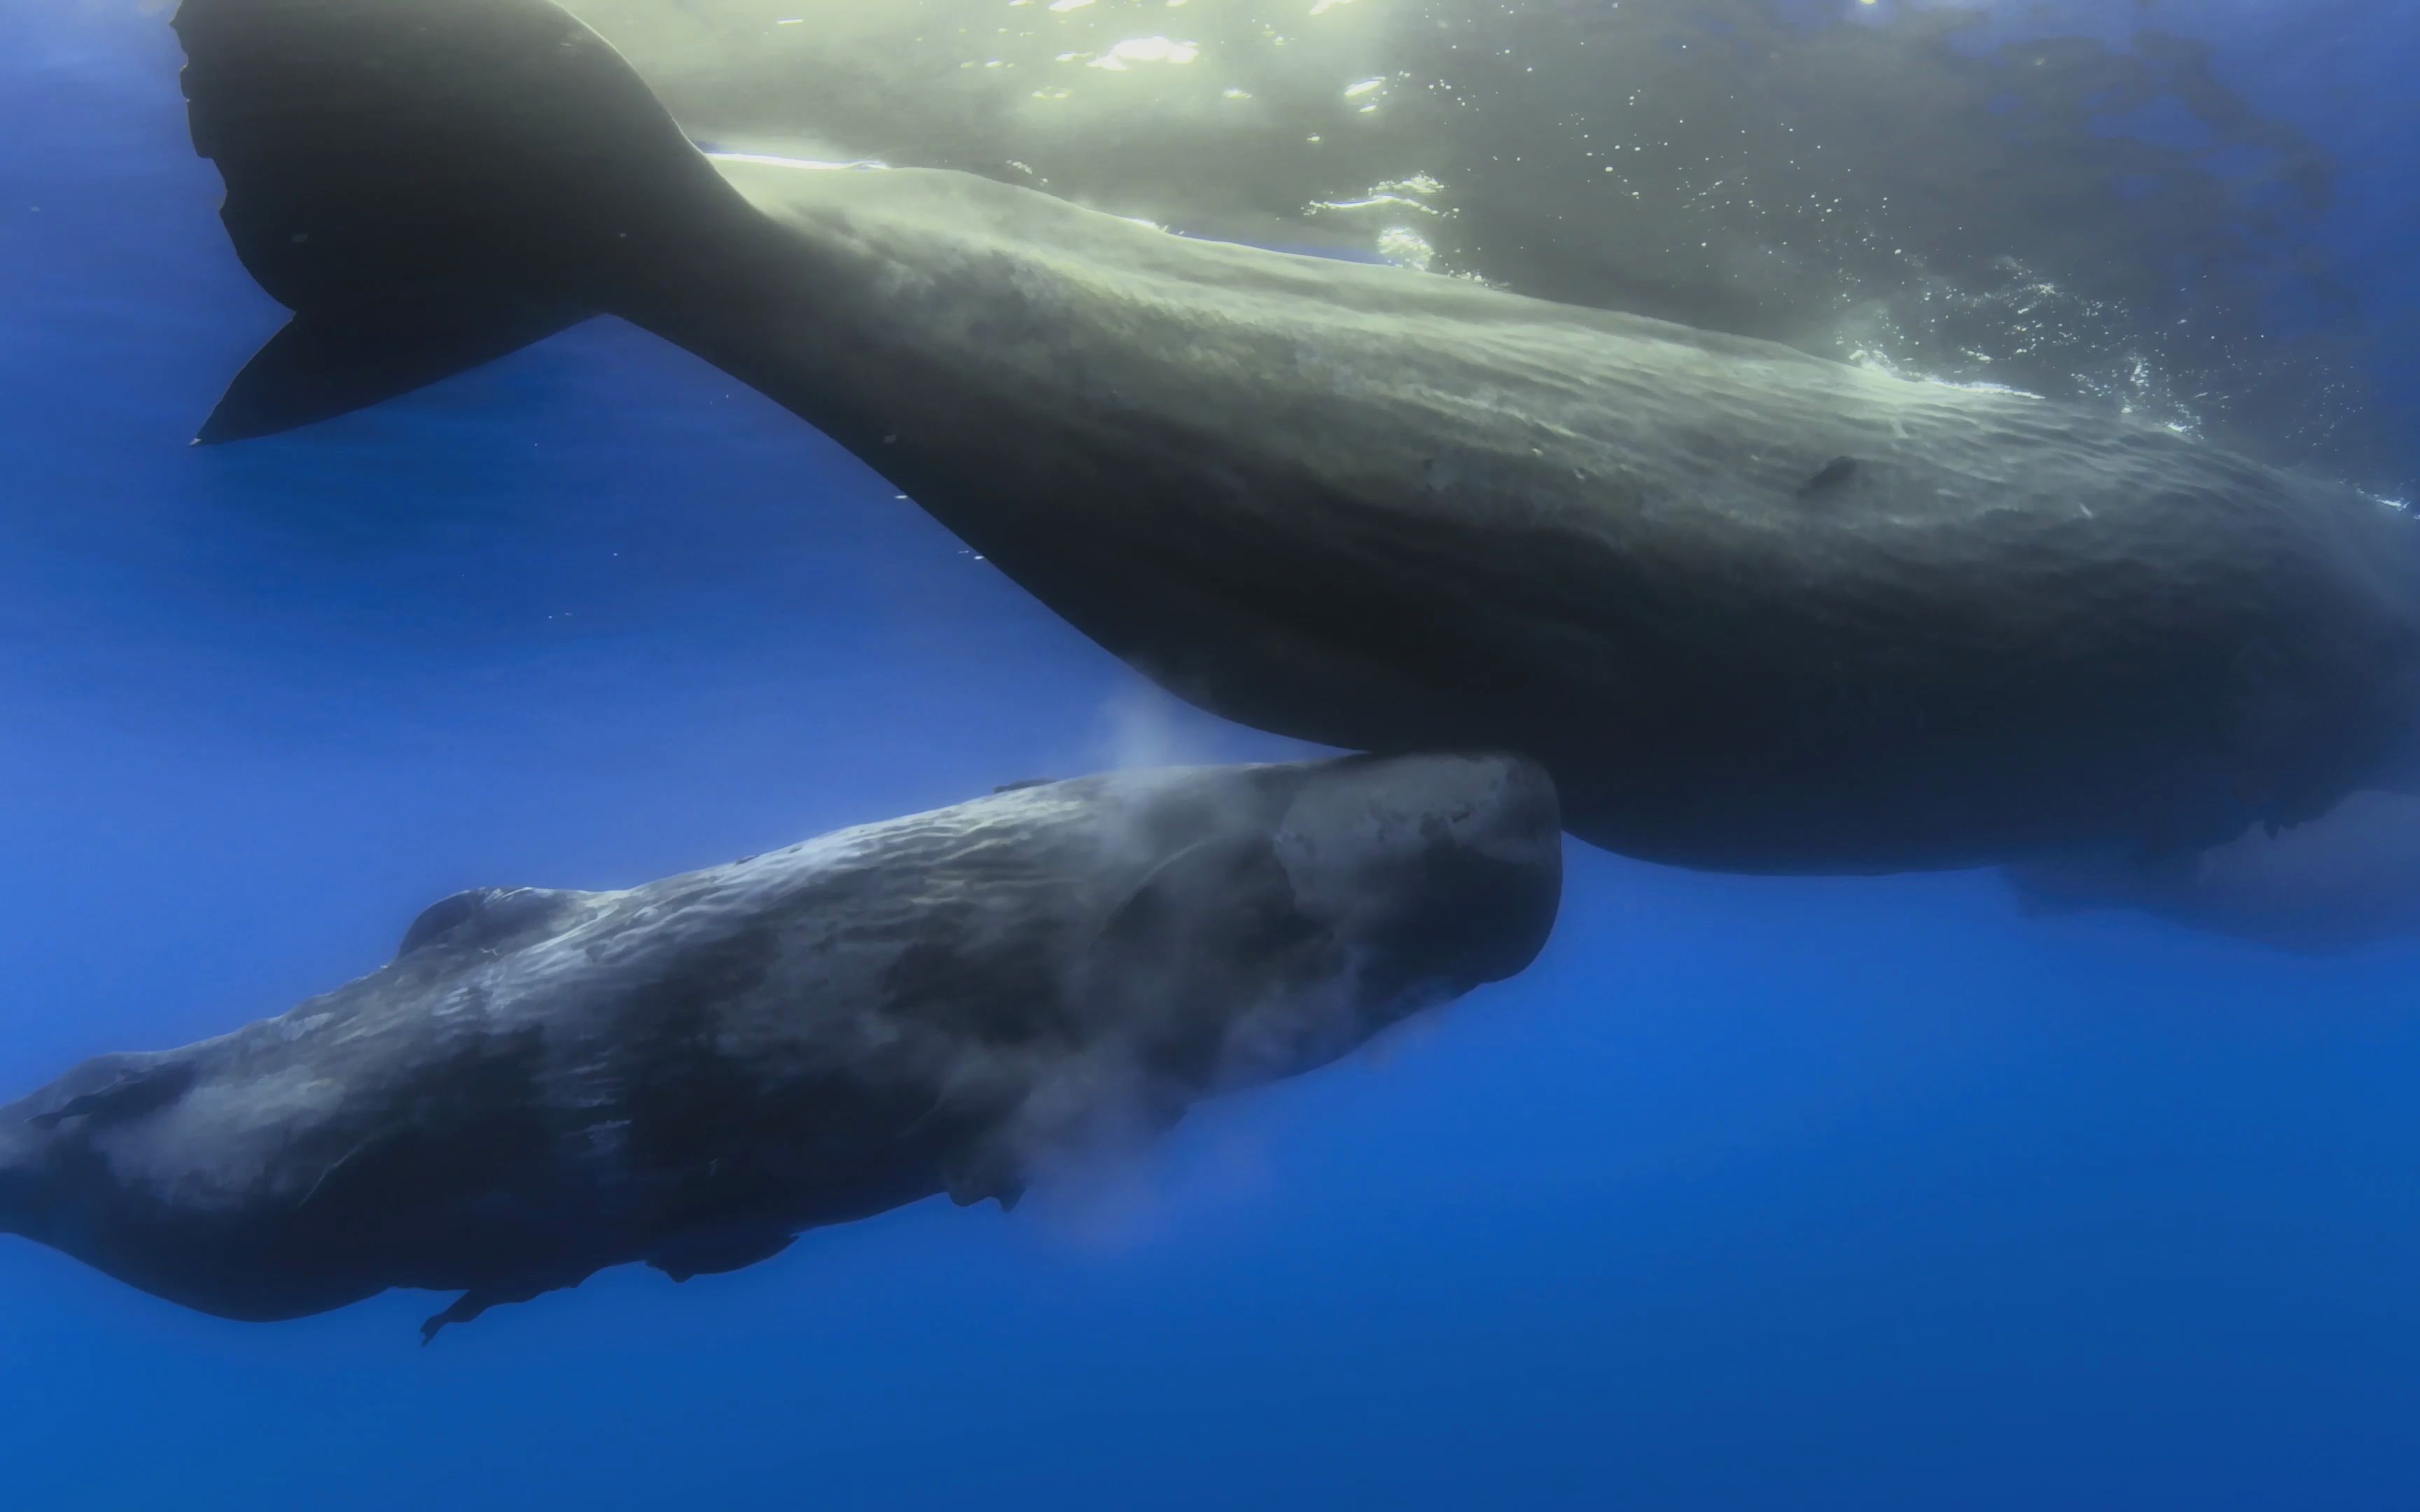 Diving with blue whales: 6 of the most amazing photos